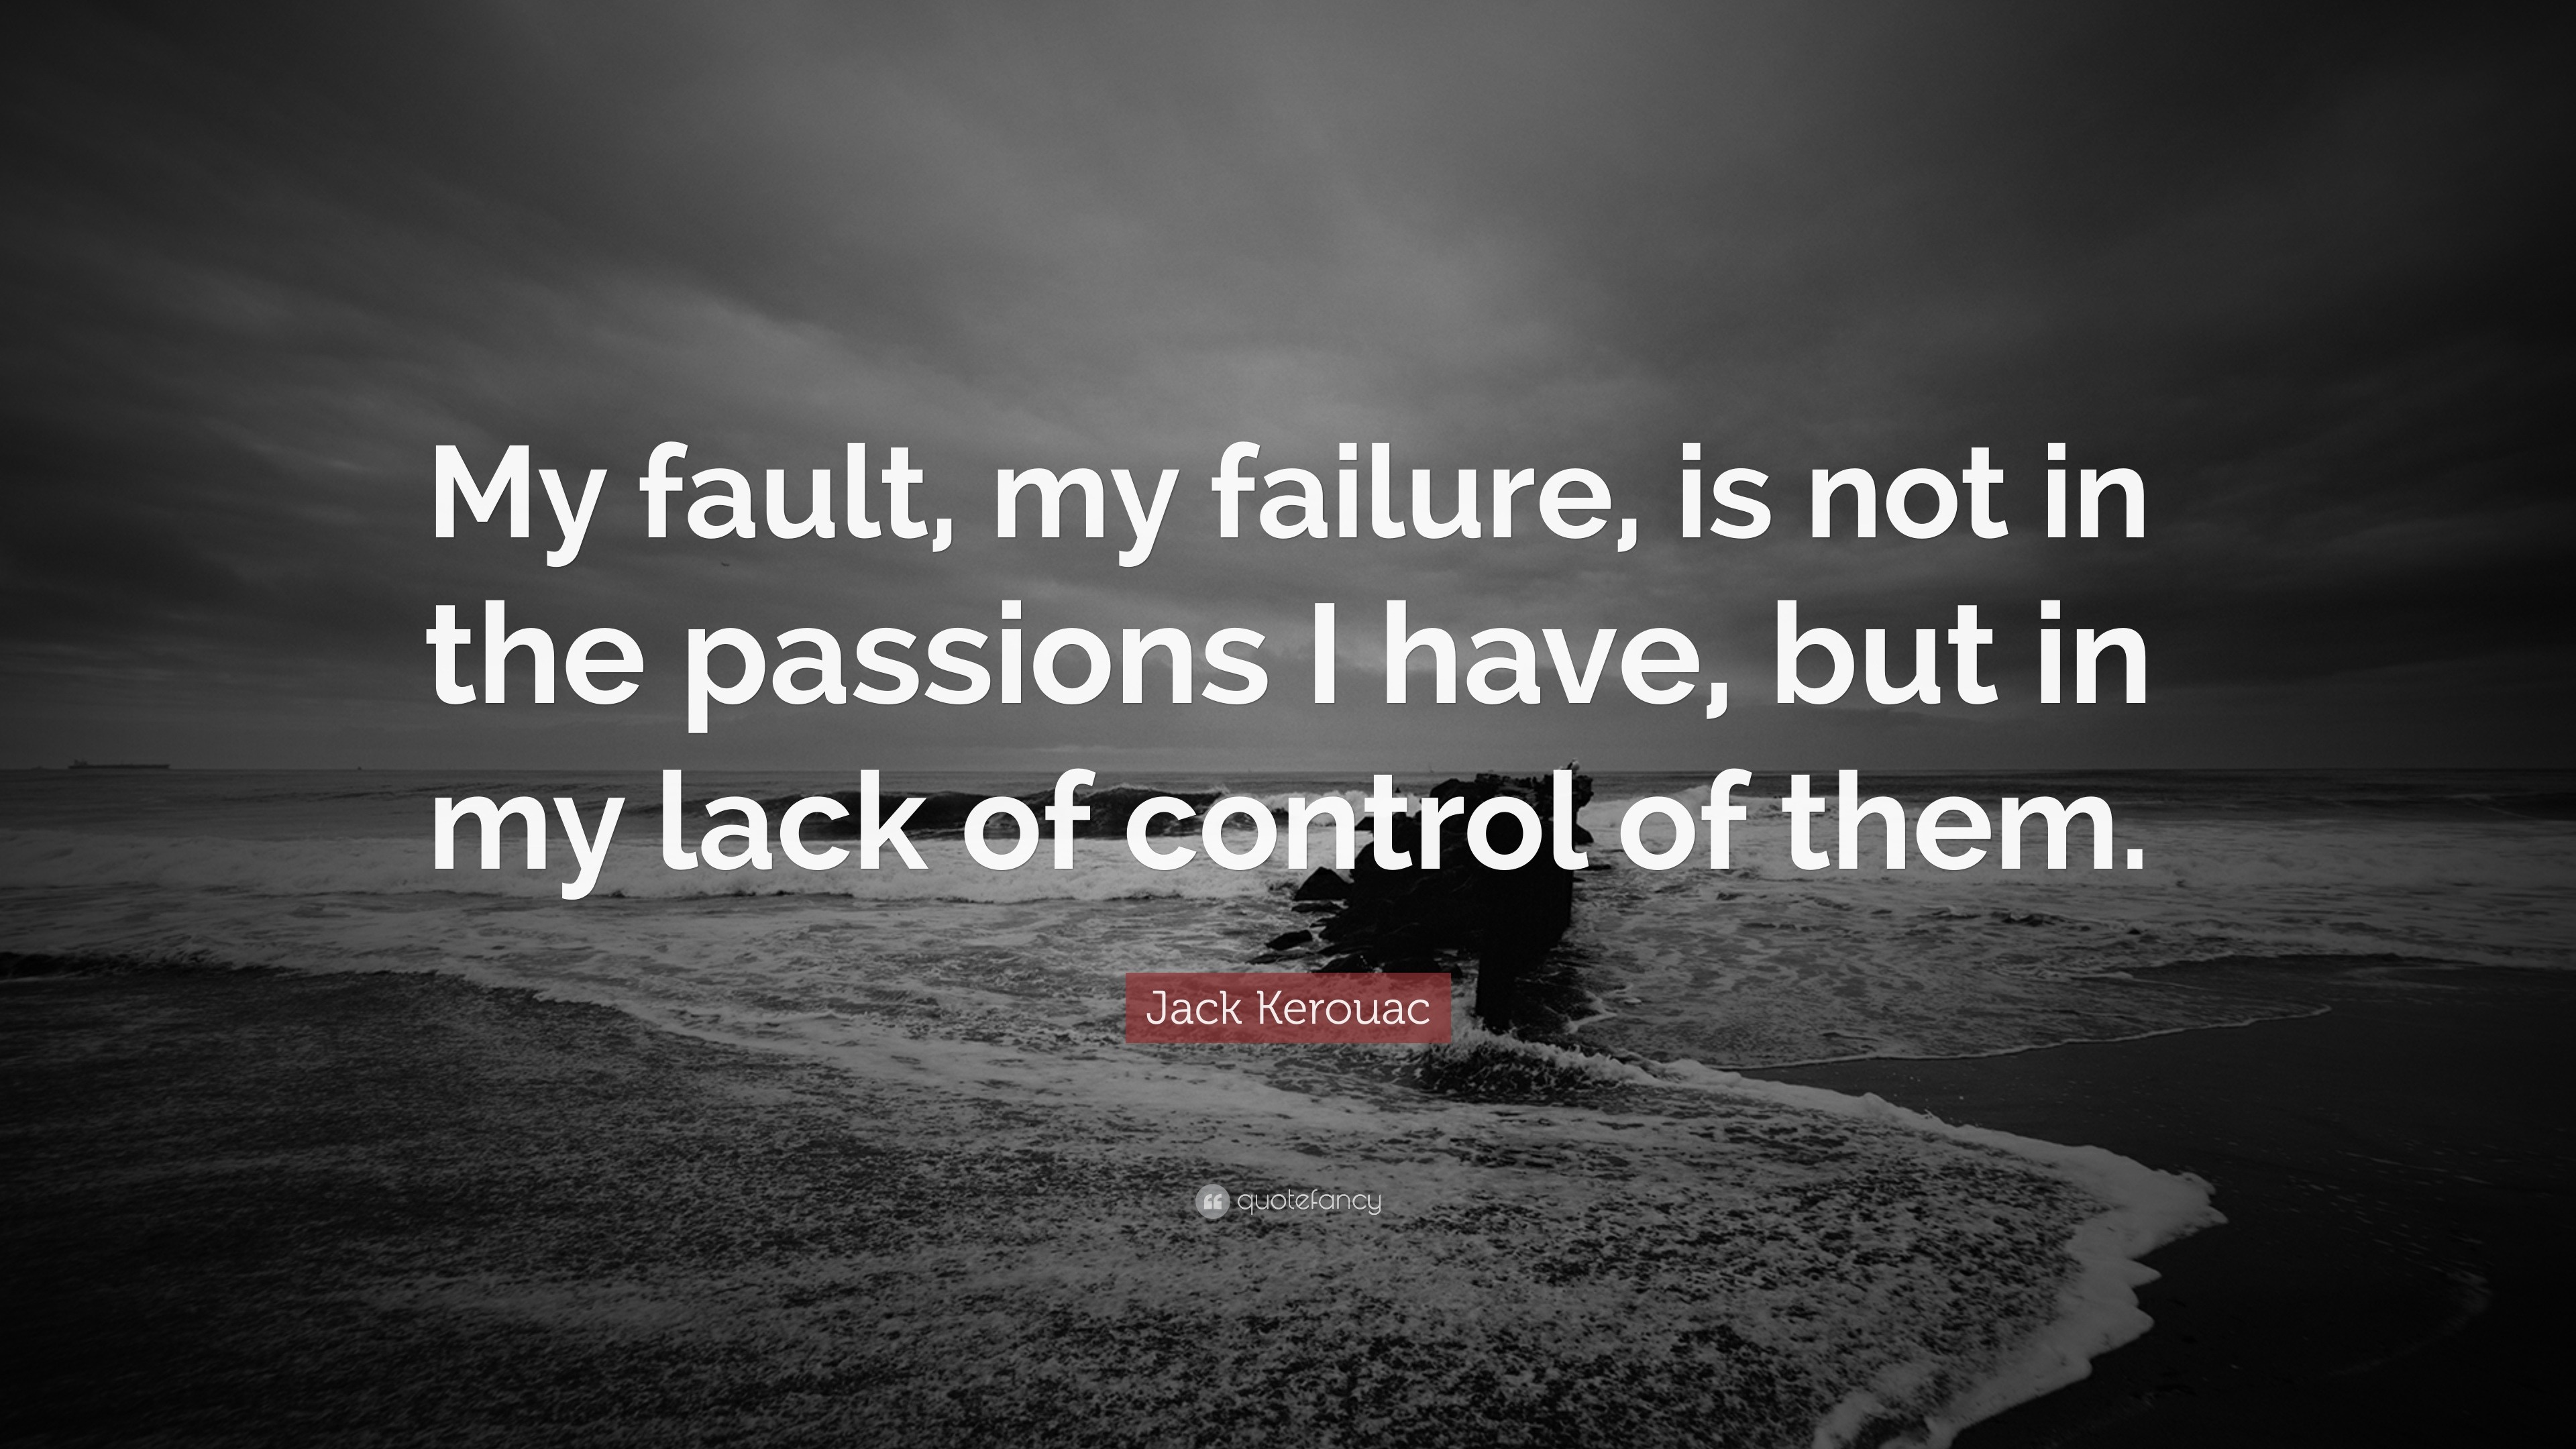 Jack Kerouac Quote “my Fault My Failure Is Not In The Passions I Have But In My Lack Of